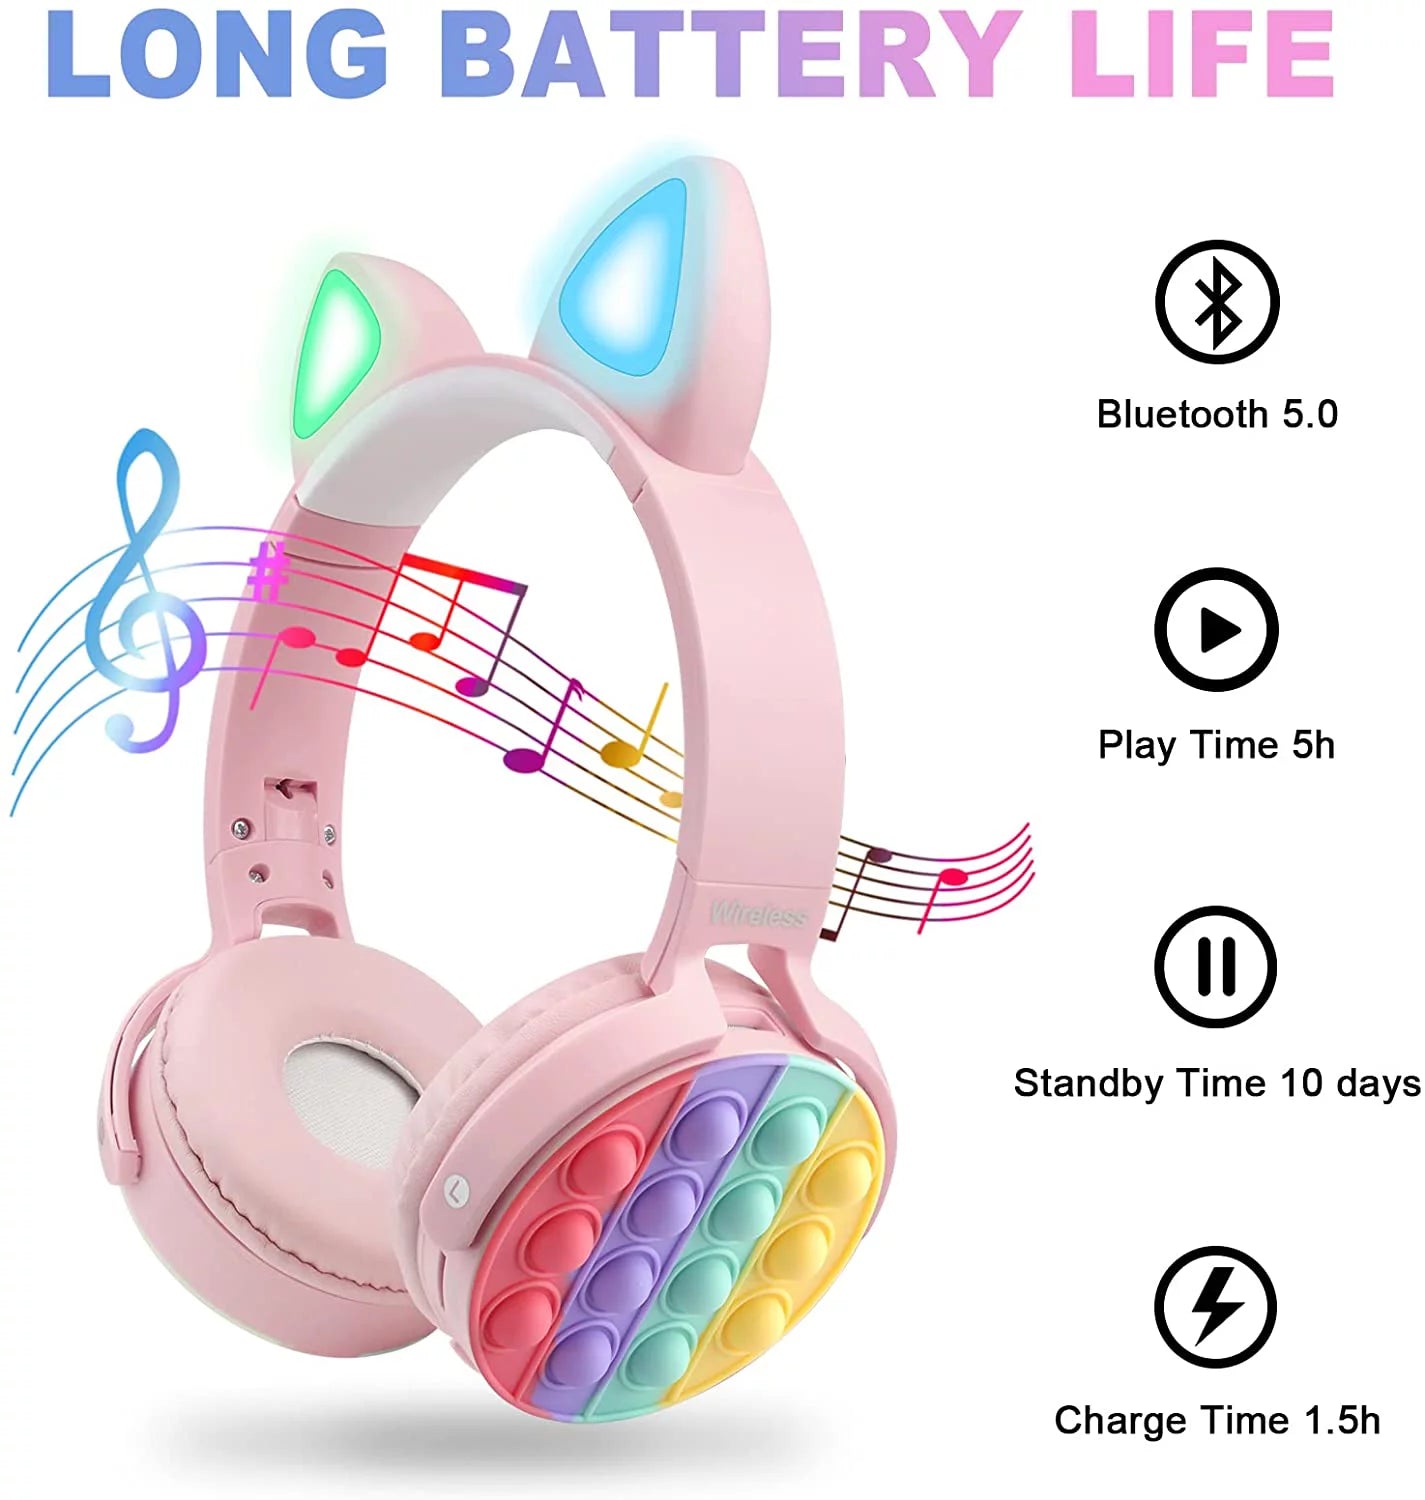 Pop Fidget Toy, 5Romanda Cat Ear Headphones with Pop Fidget Toy, 5.0 Bluetooth Wireless
Kids Headphones Description: Silicone Bluetooth Headphones for Kids - Our cute on-ear headphone adopts Bluetooth 5.0 technology with built-in mic for stable signal,ElectronicsLive Online MallLive Online MallPop Fidget Toy, 5